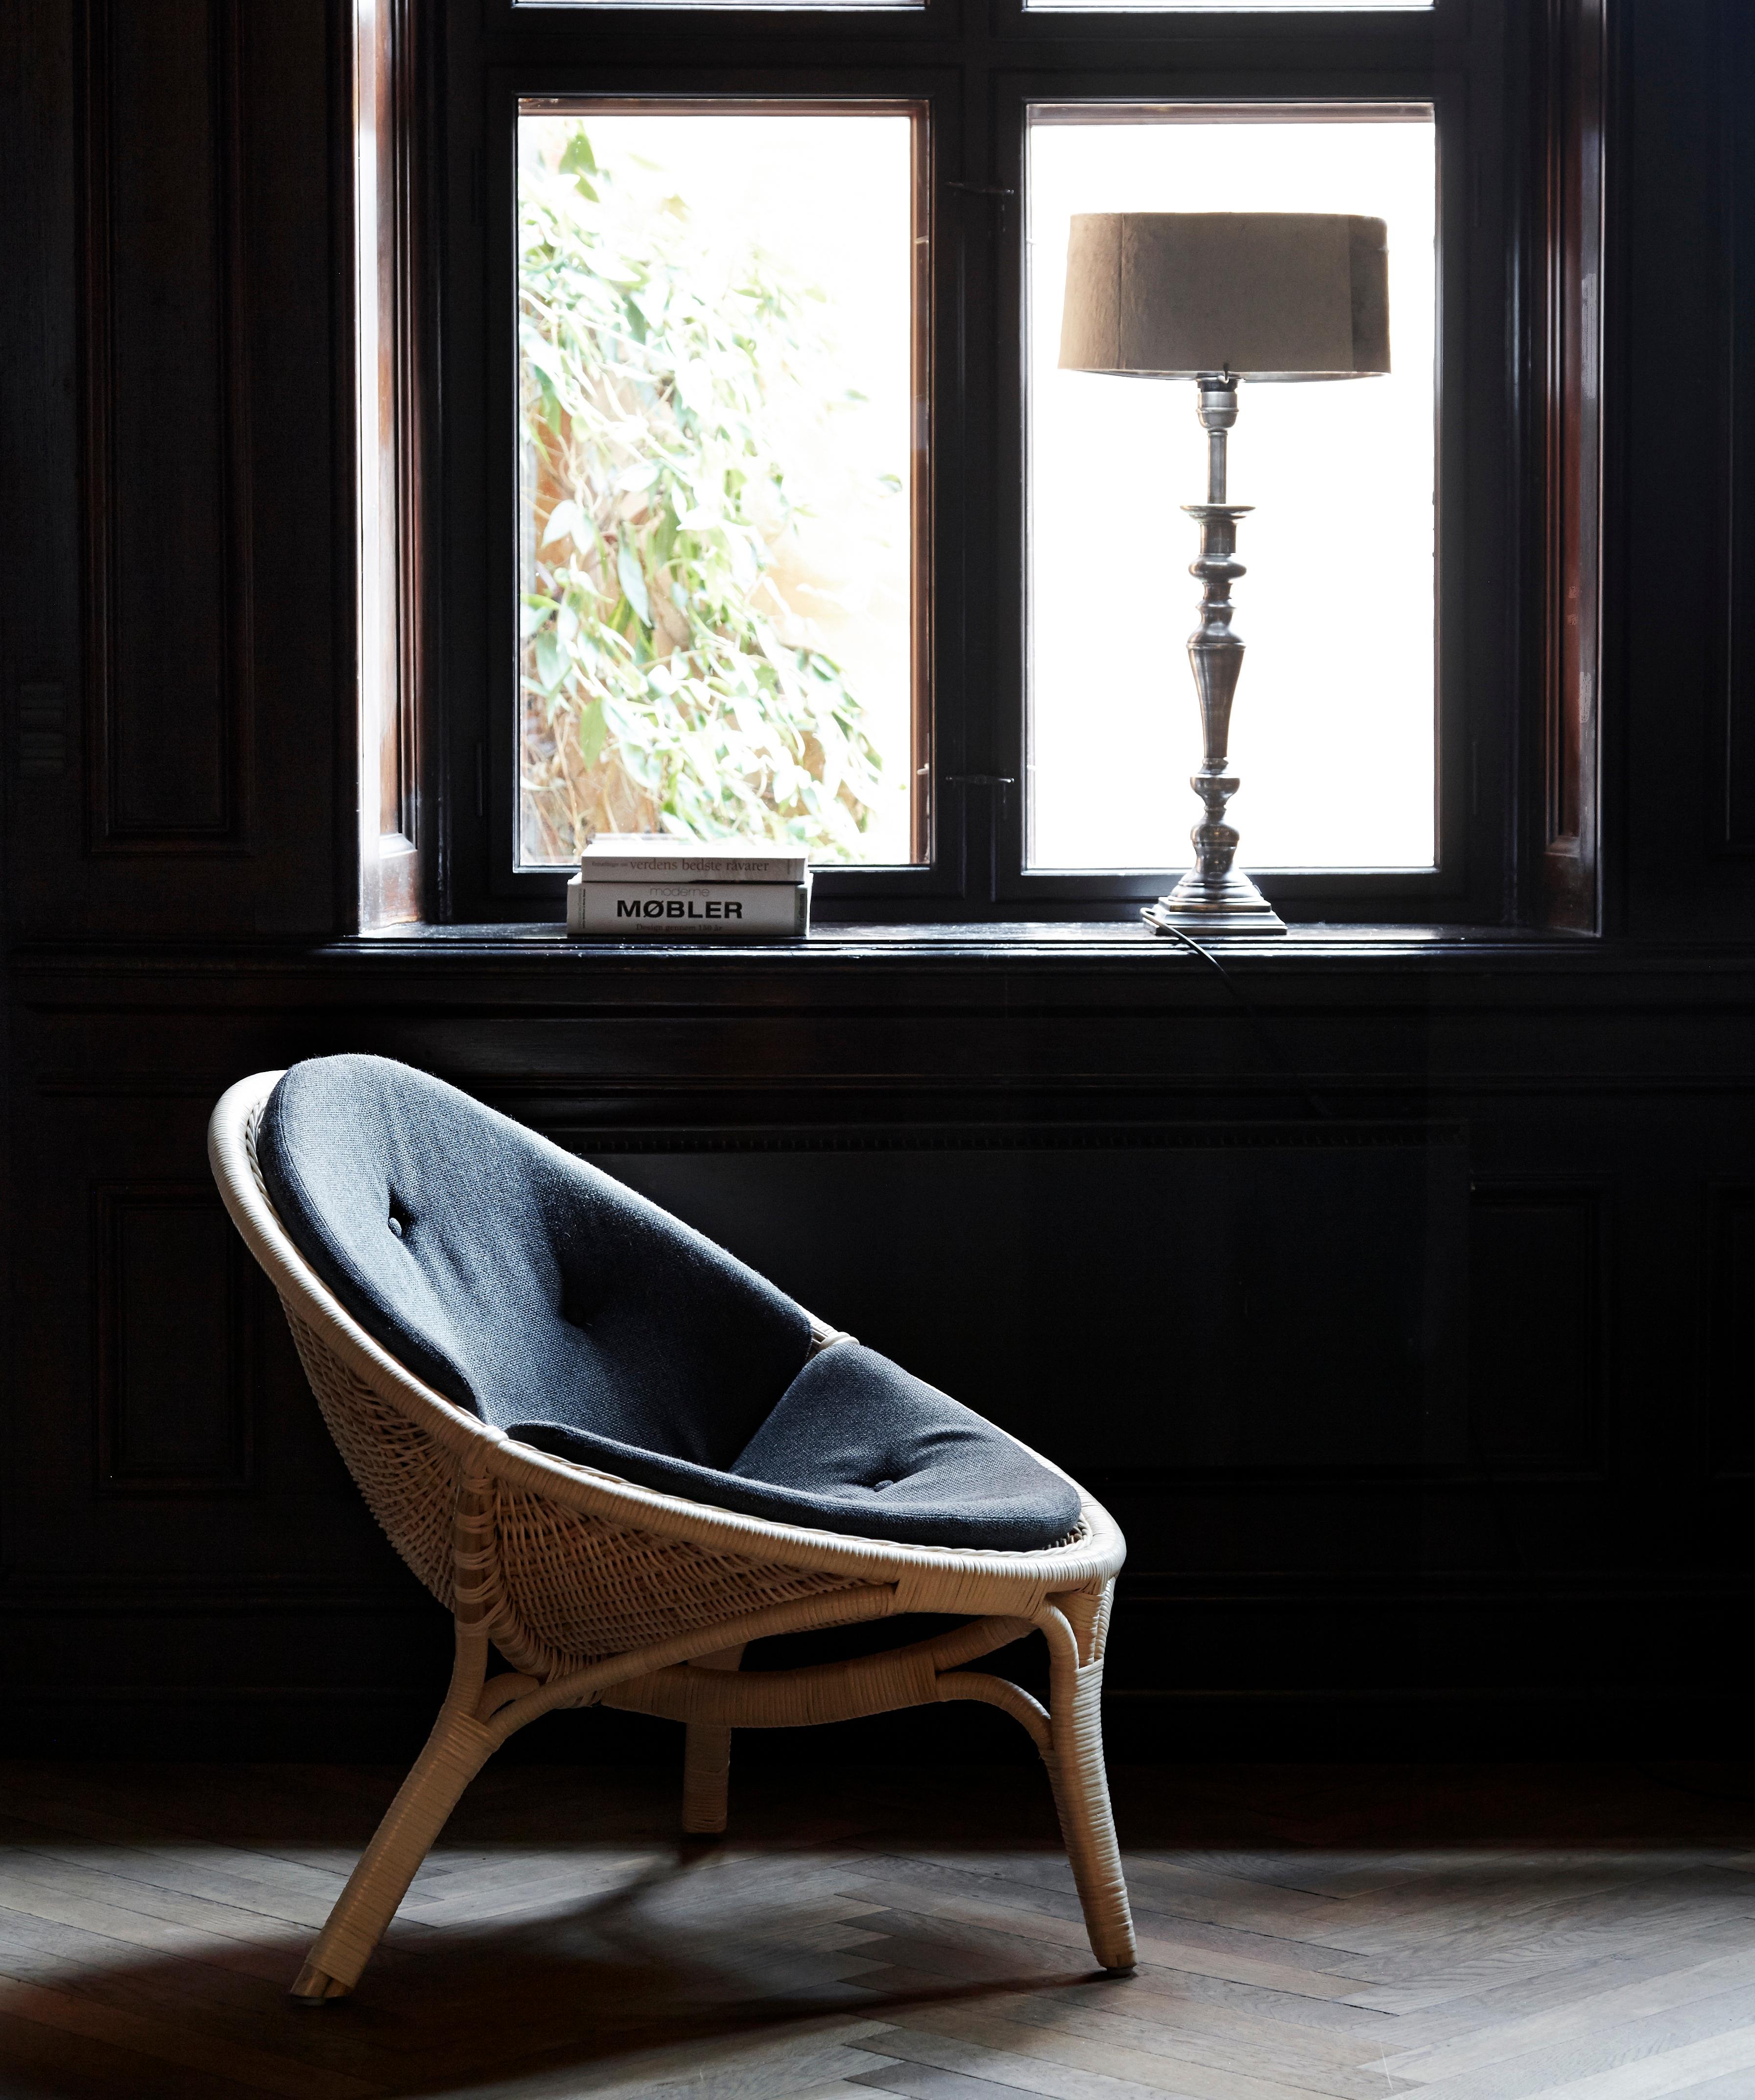 Rana lounge chair. The 3-legged rattan chair, Rana, is one of the first chairs based on the idea of integrating a shell on a frame in one piece, and was the beginning of the rediscovery of the natural material rattans many properties.
Seat and back